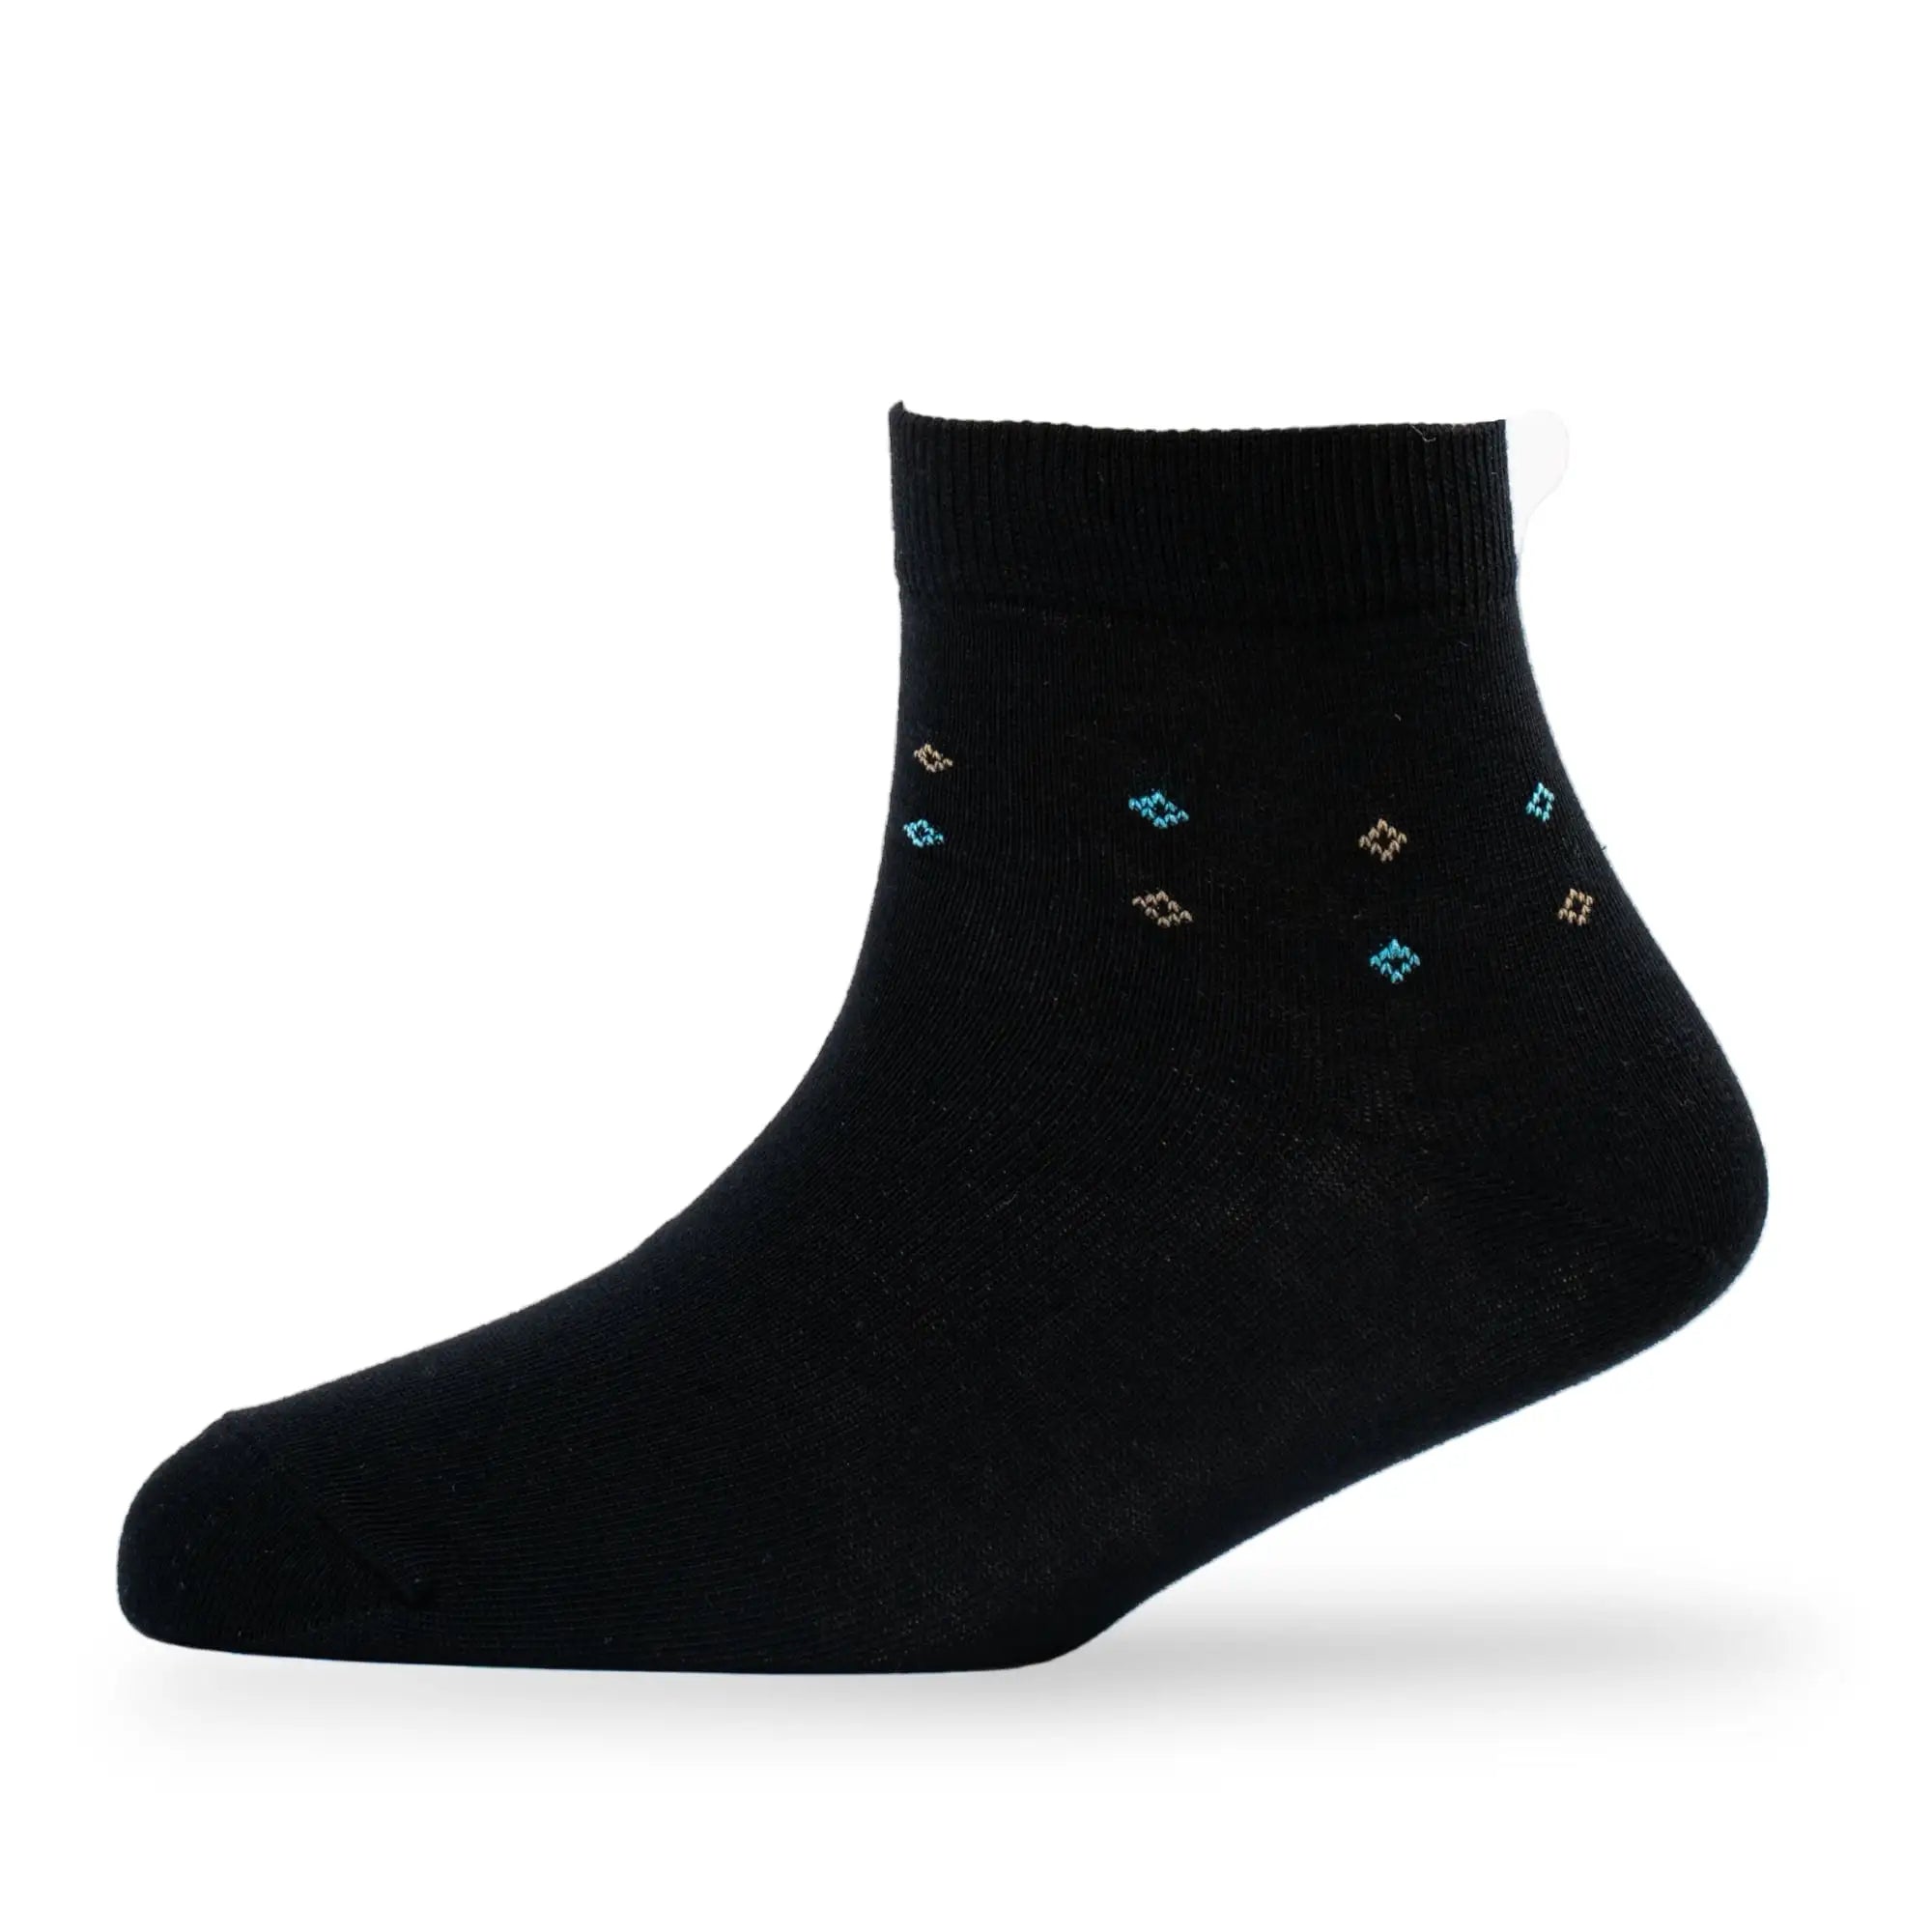 Young Wings Men's Multi Colour Cotton Fabric Motif Ankle Length Socks - Pack of 5, Style no. M1-2140